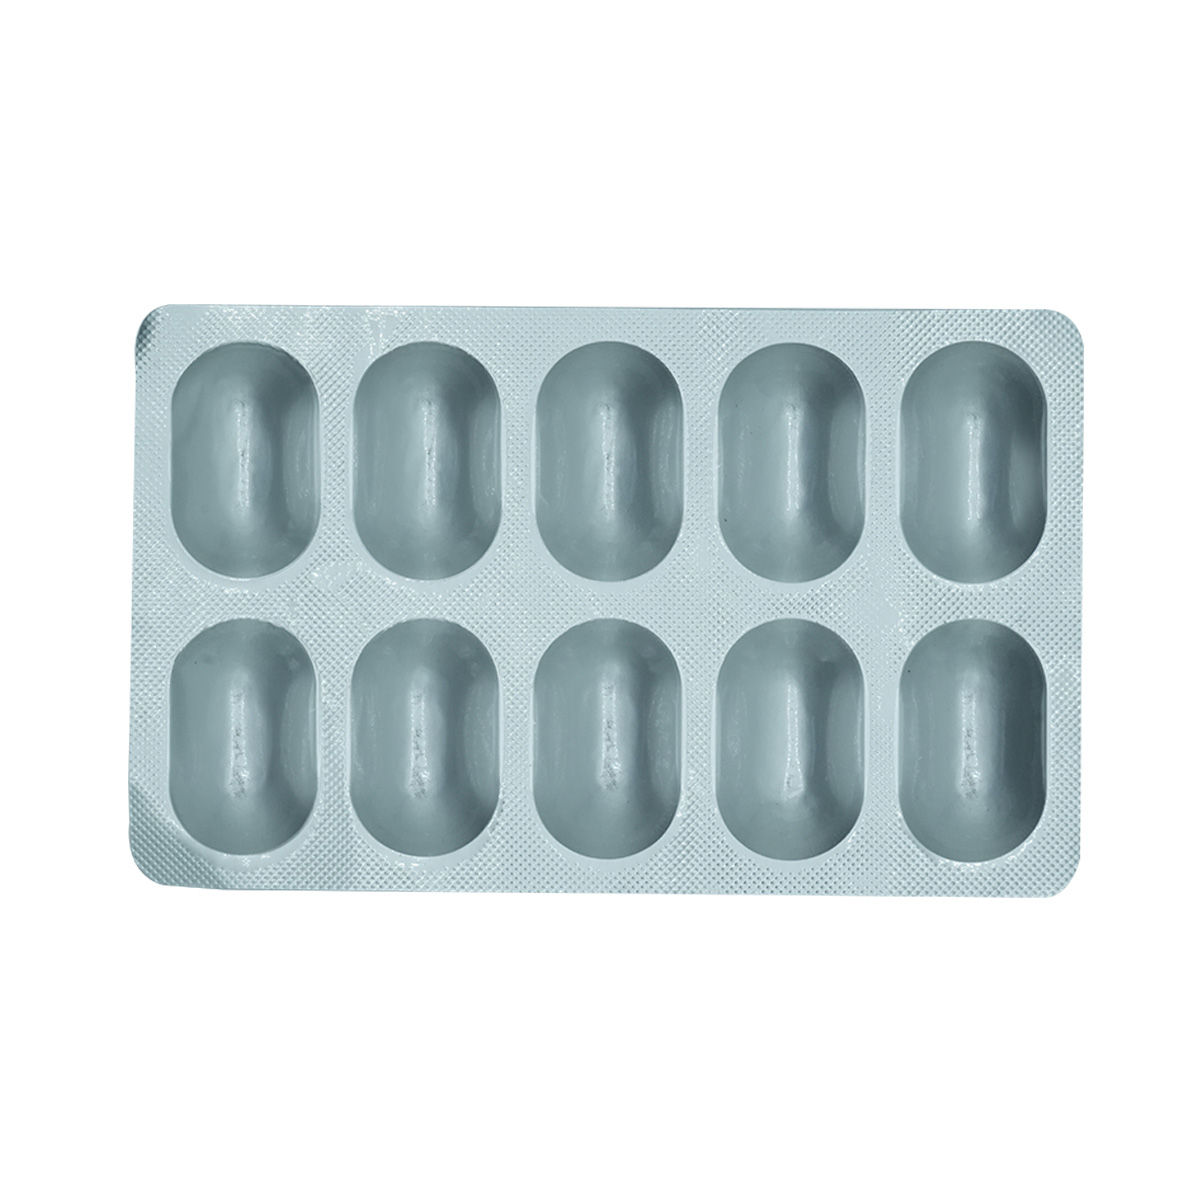 Clostop 500 mg Tablet 10's, Pack of 10 TabletS